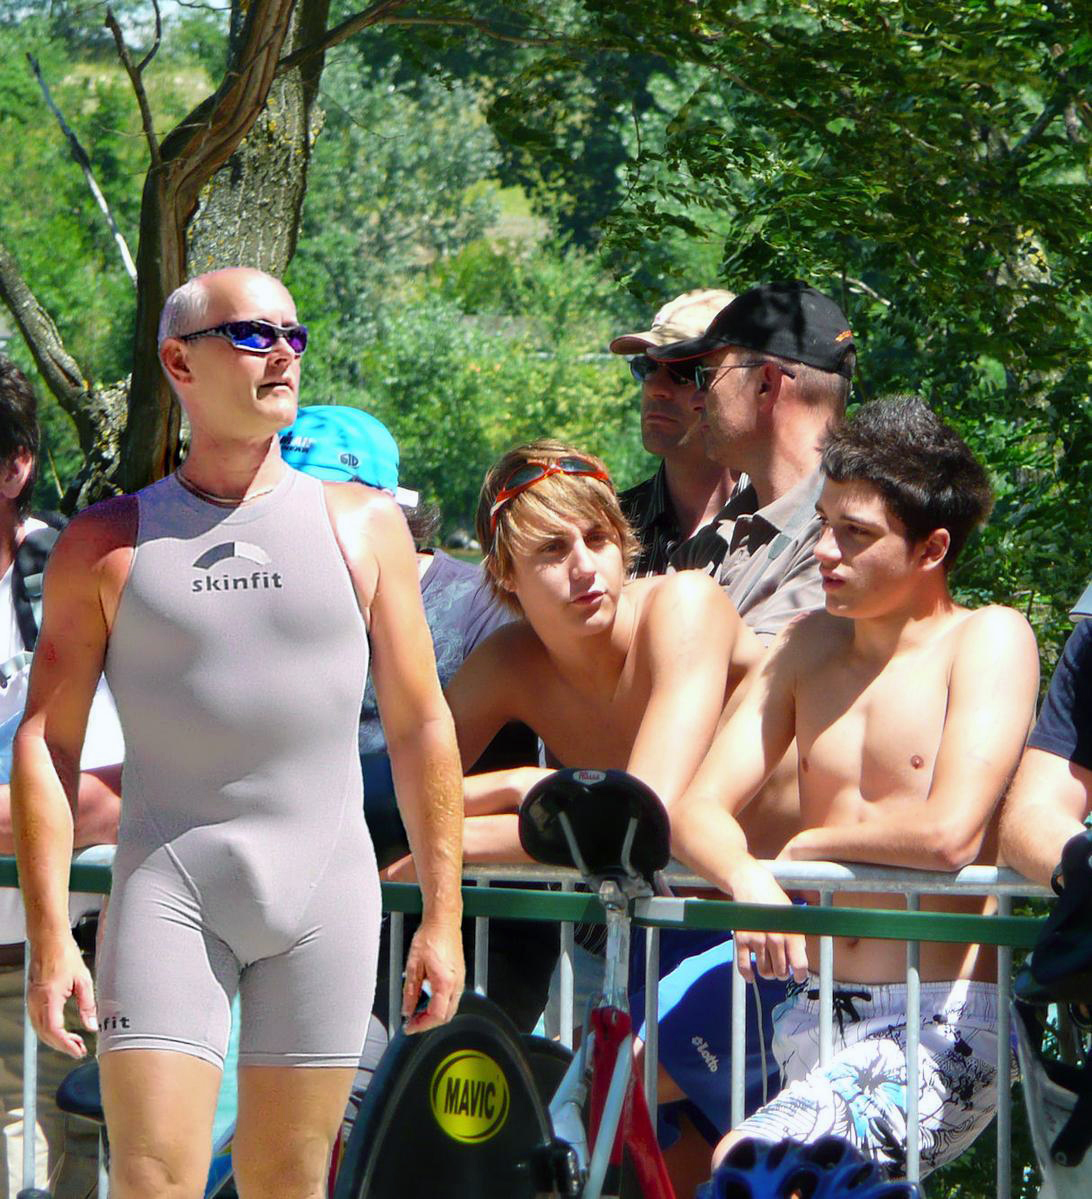 Triathletes in Grey Skinsuits and Tri Shorts.